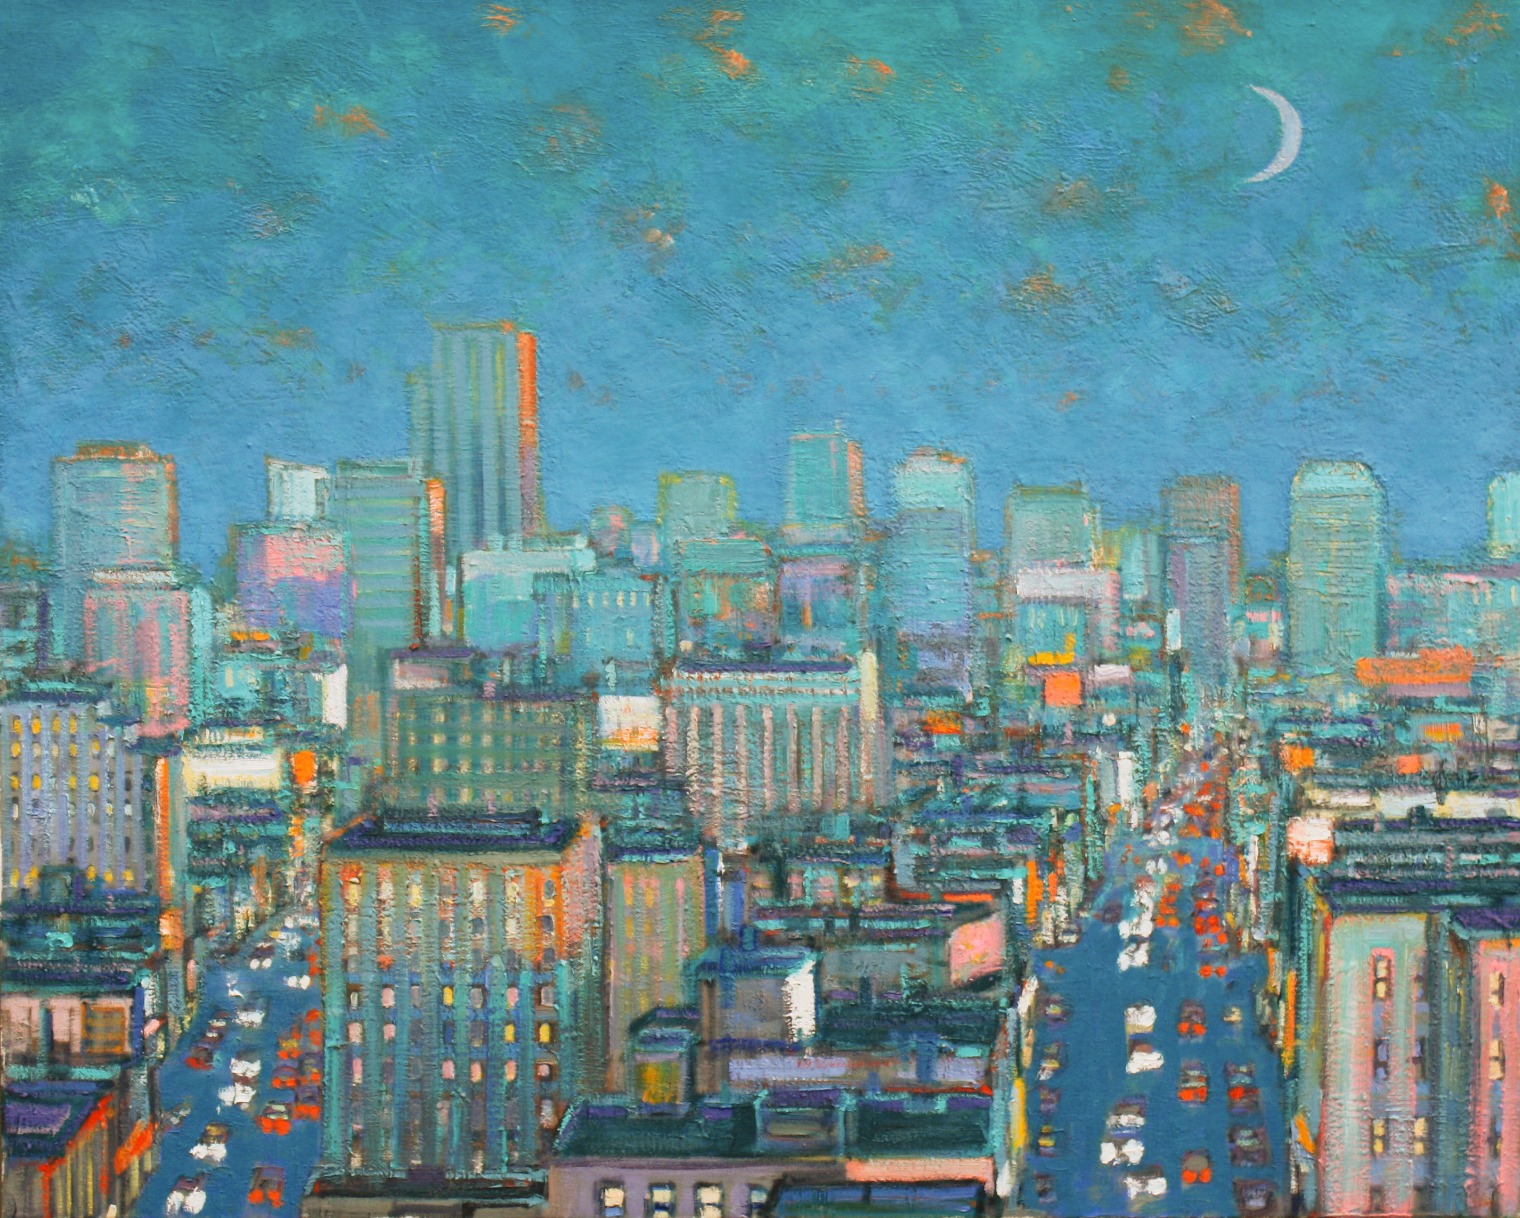 Aerial View of City at Evening   40" x 50"